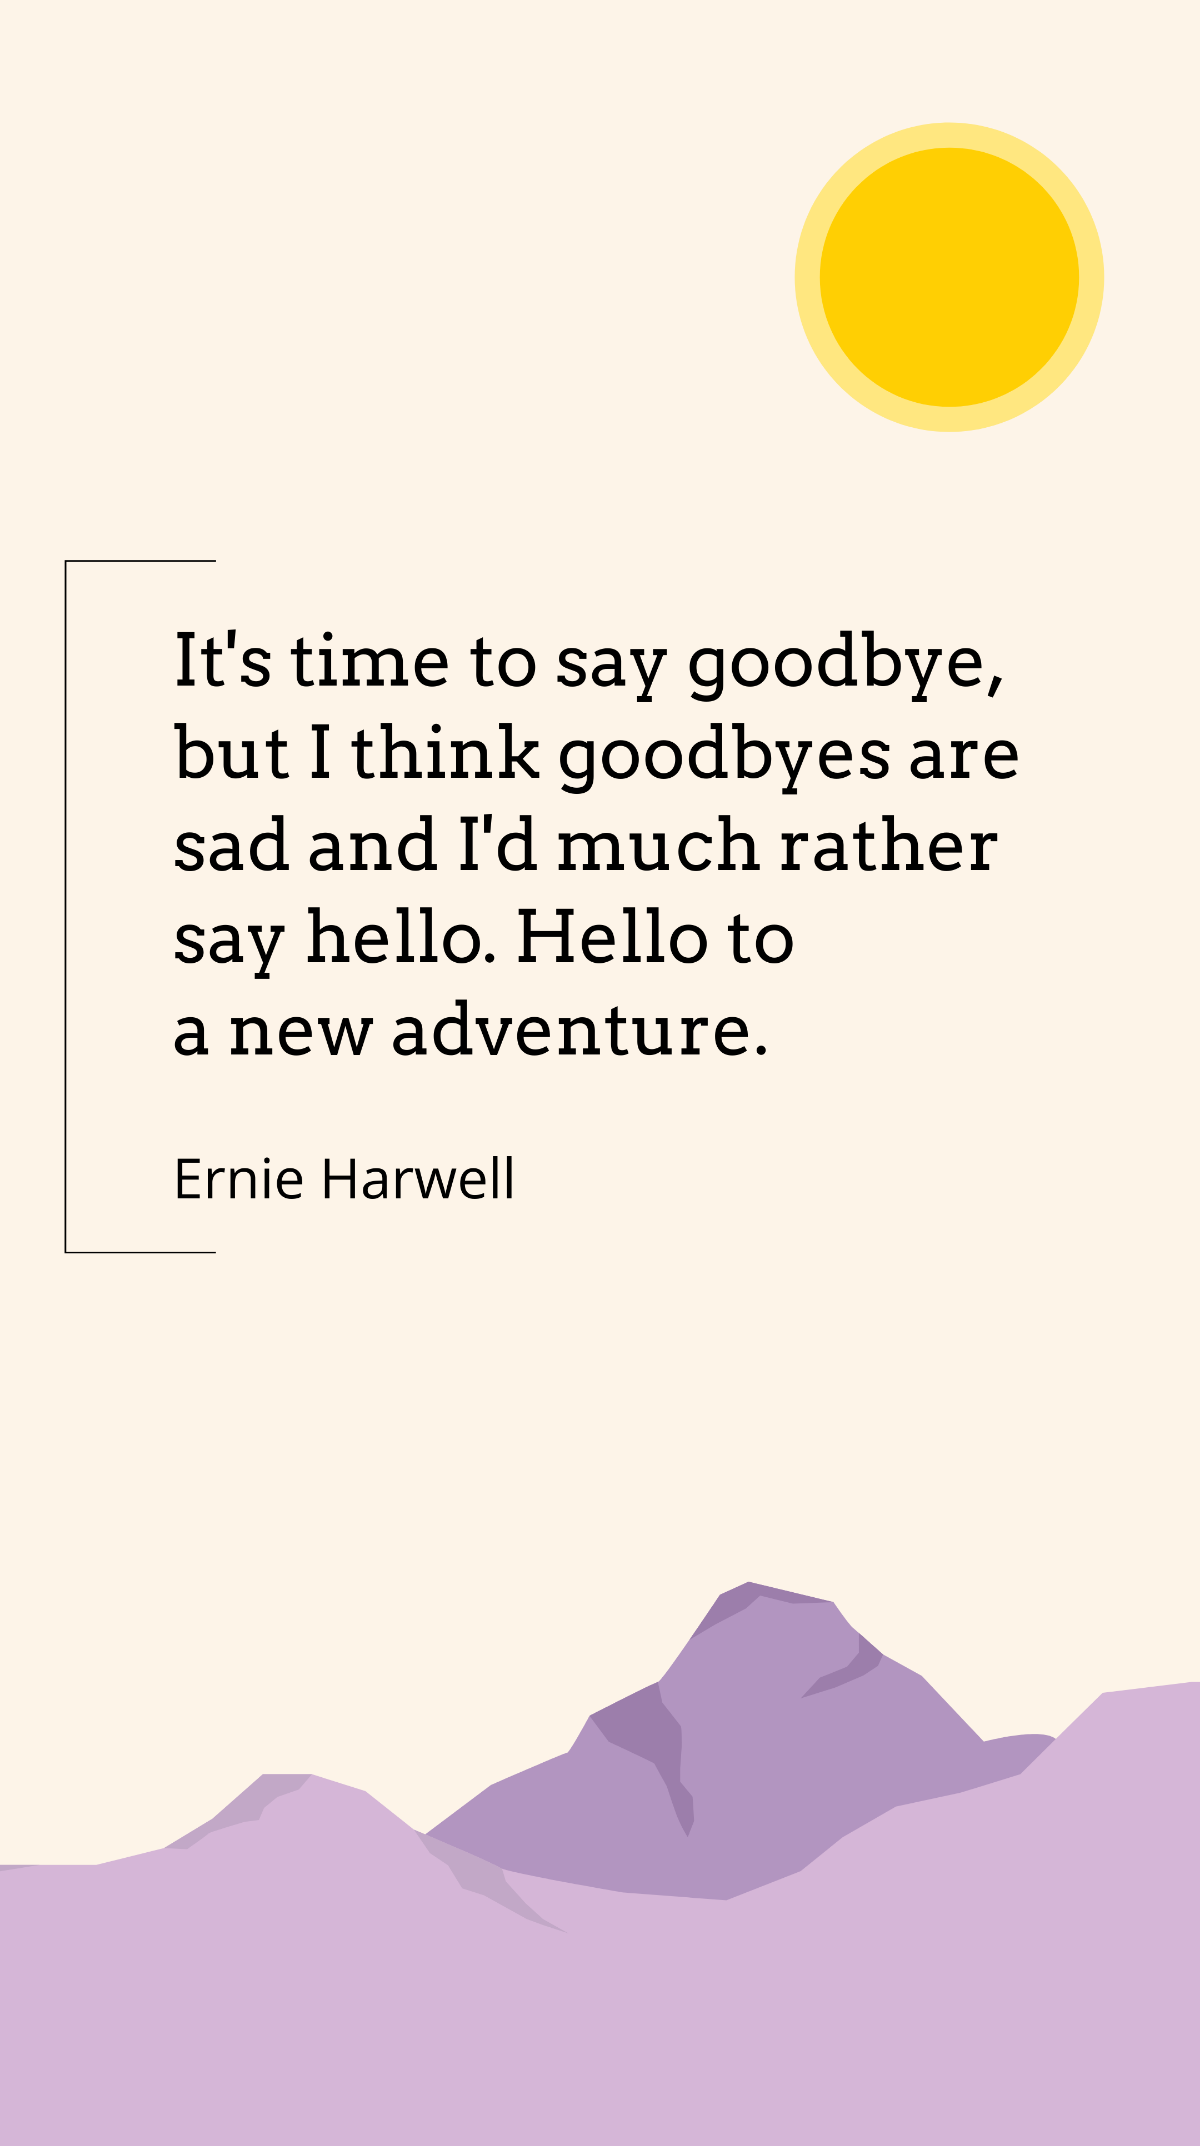 Ernie Harwell - It's time to say goodbye, but I think goodbyes are sad and I'd much rather say hello. Hello to a new adventure. Template